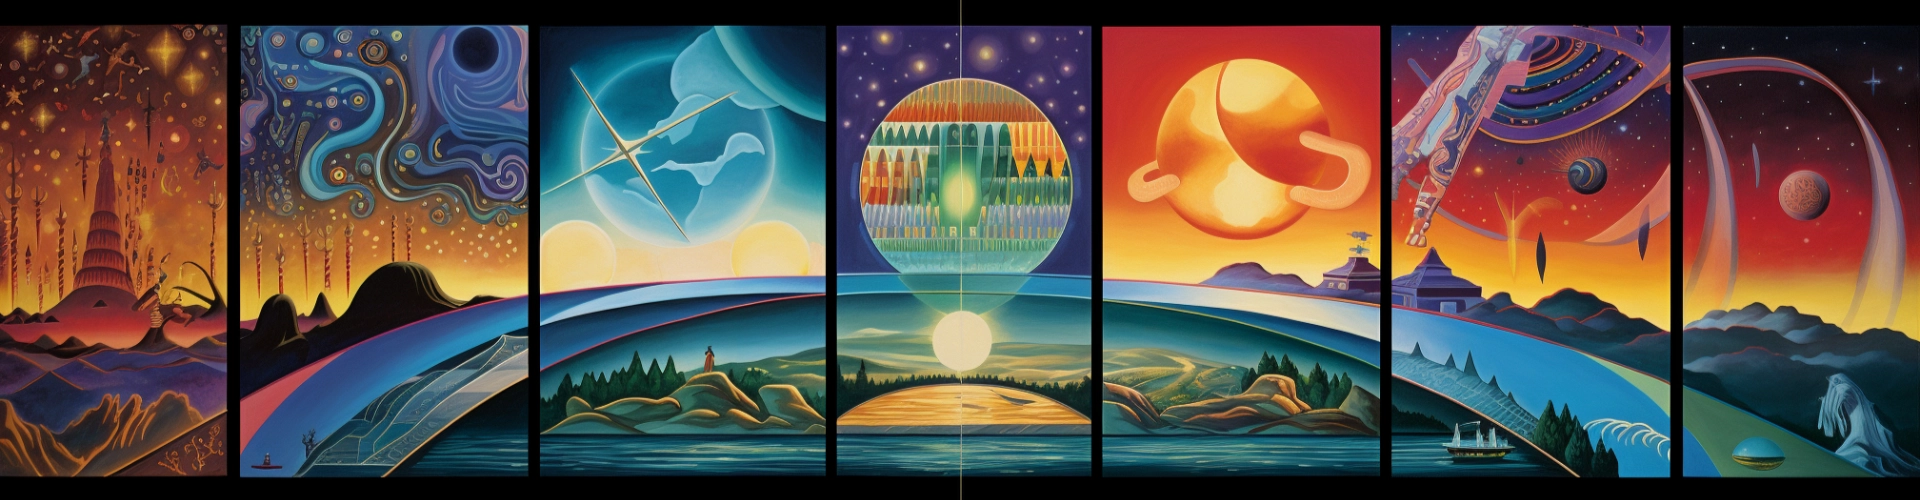 stylistic mural with 7 panels each showing a different object on a science fantasy background